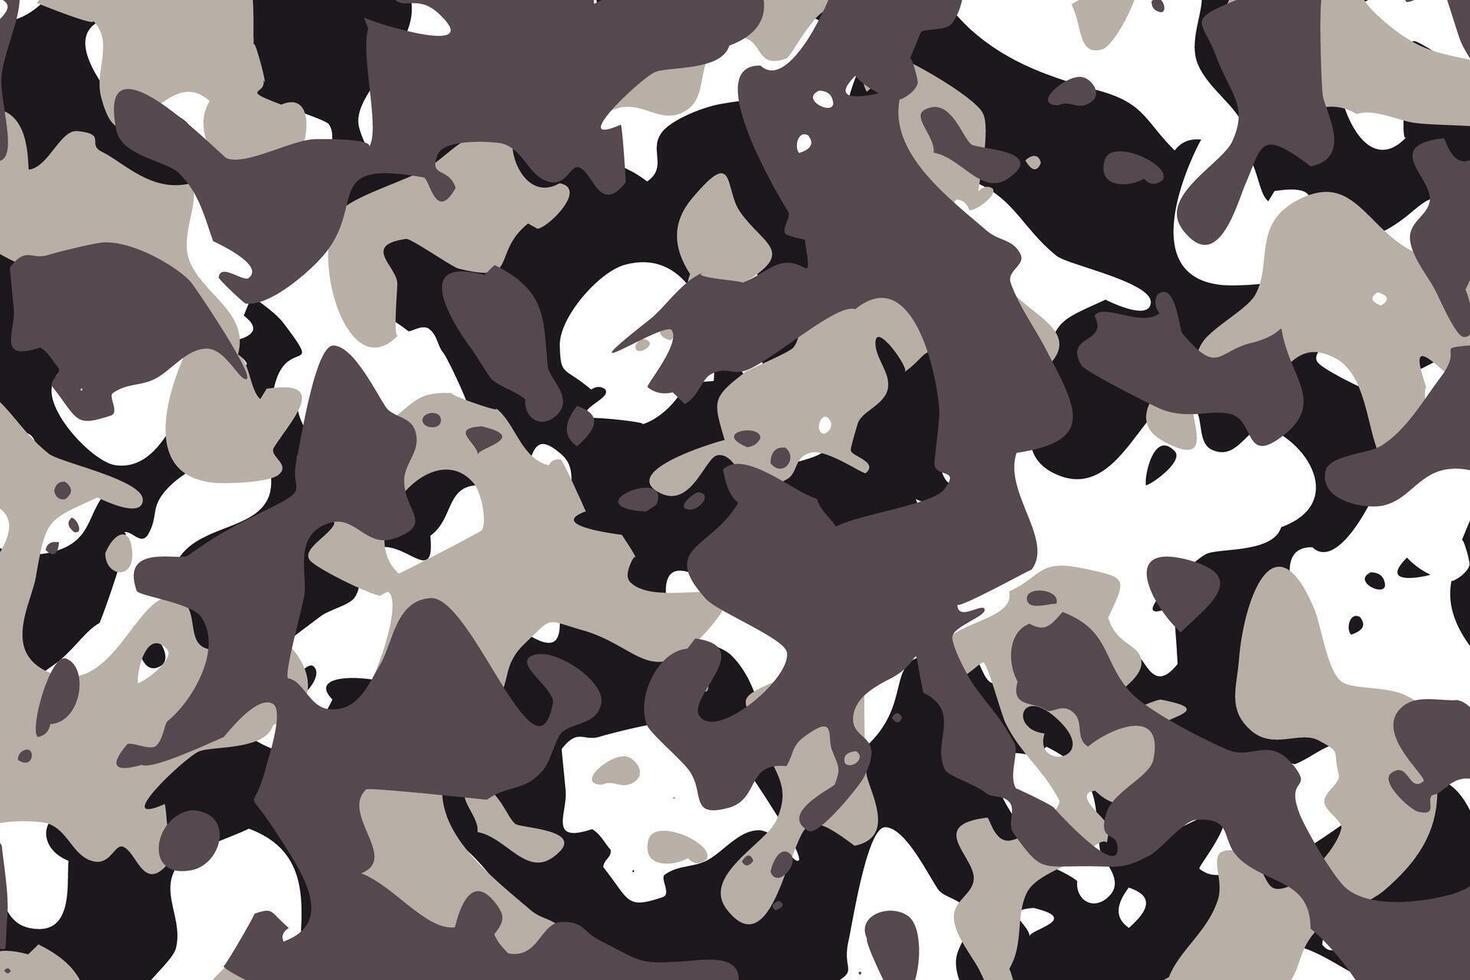 camouflage pattern texture in gray shades background vector